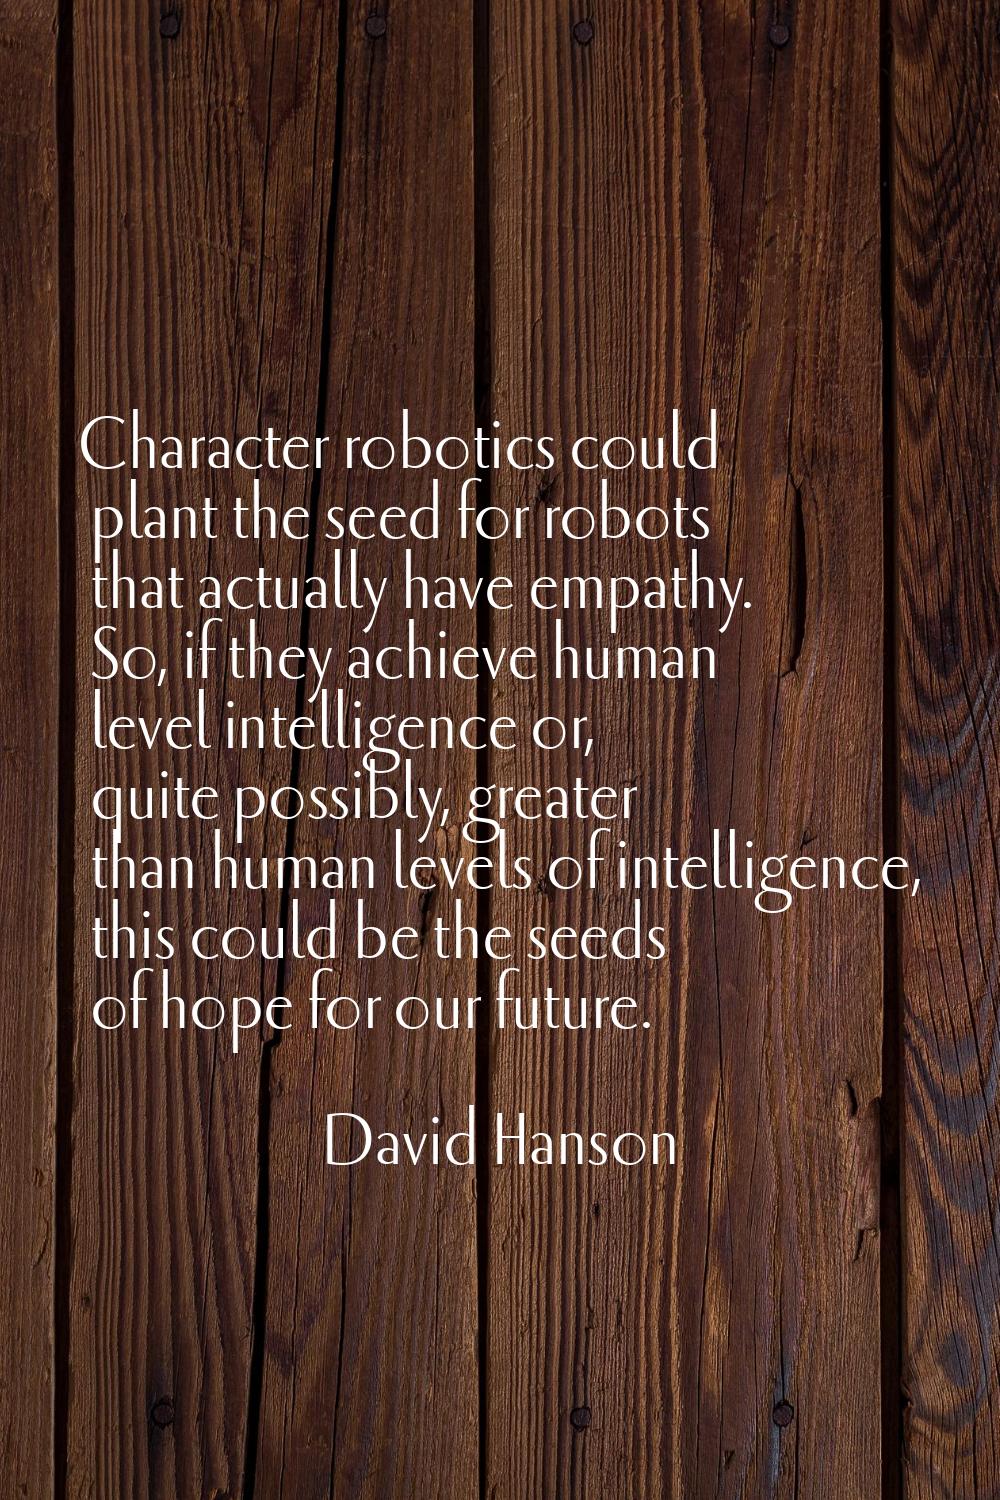 Character robotics could plant the seed for robots that actually have empathy. So, if they achieve 